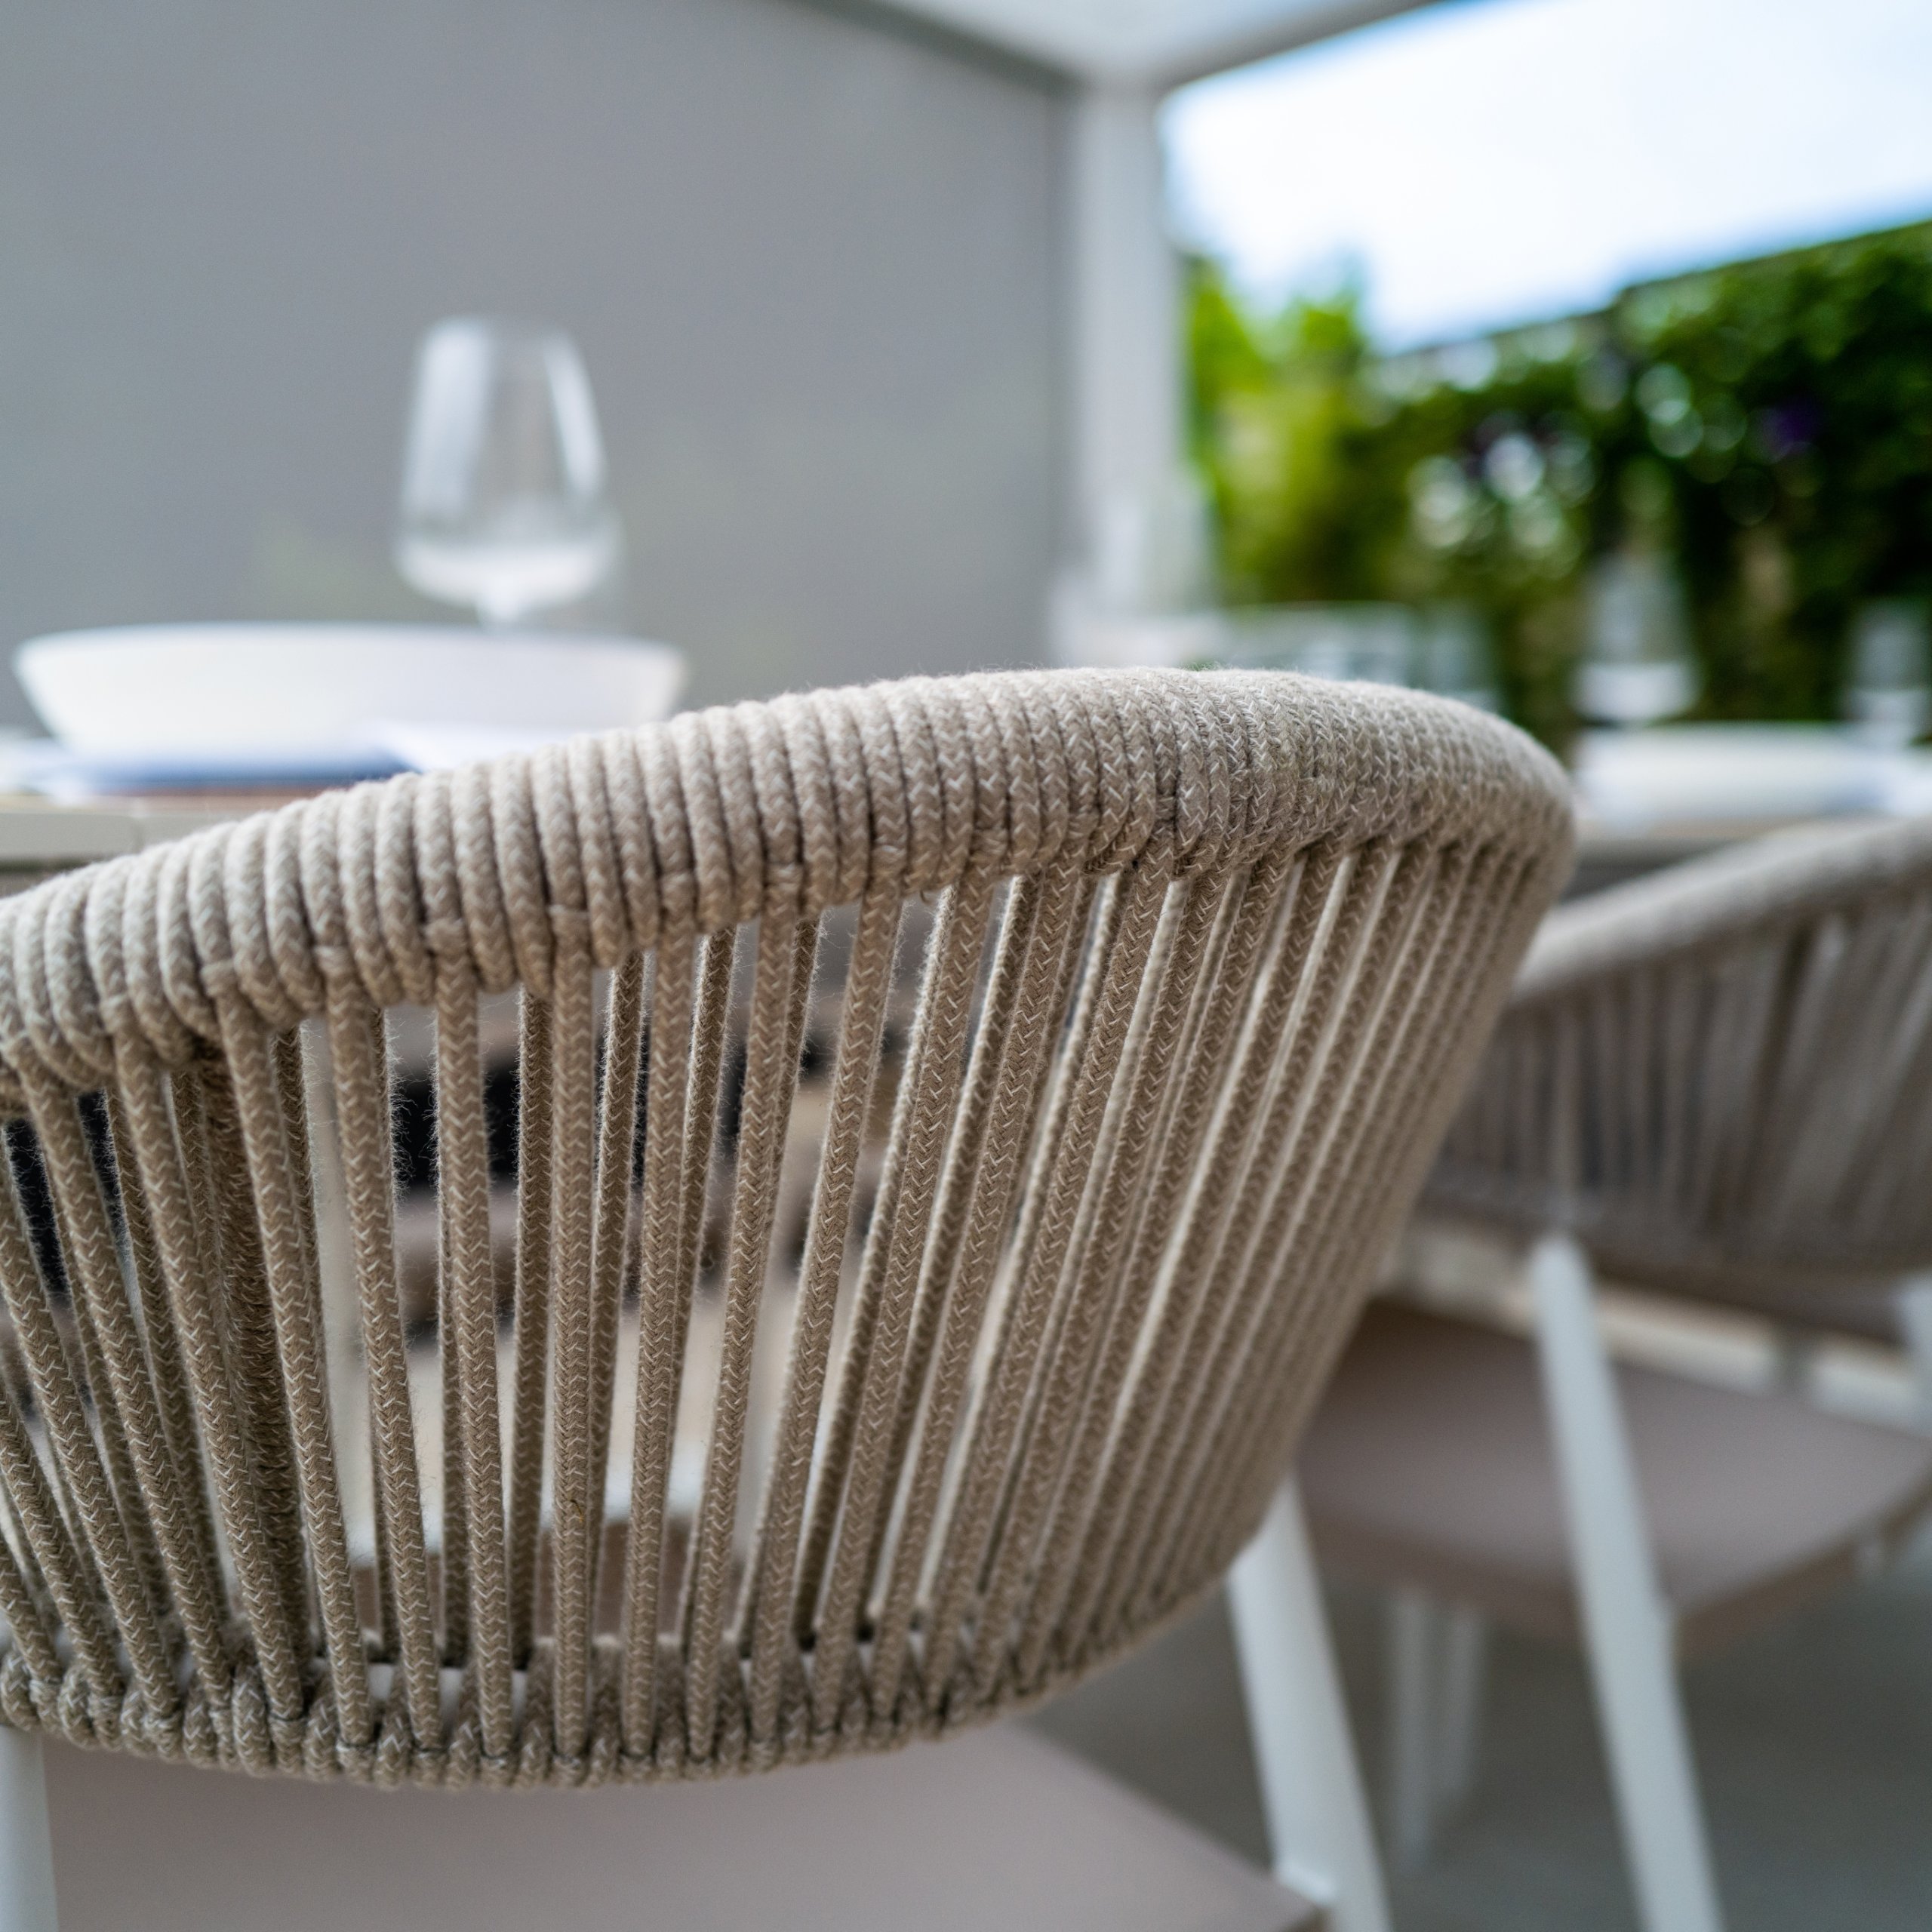 Matera dining chair from Suns Lifestyle